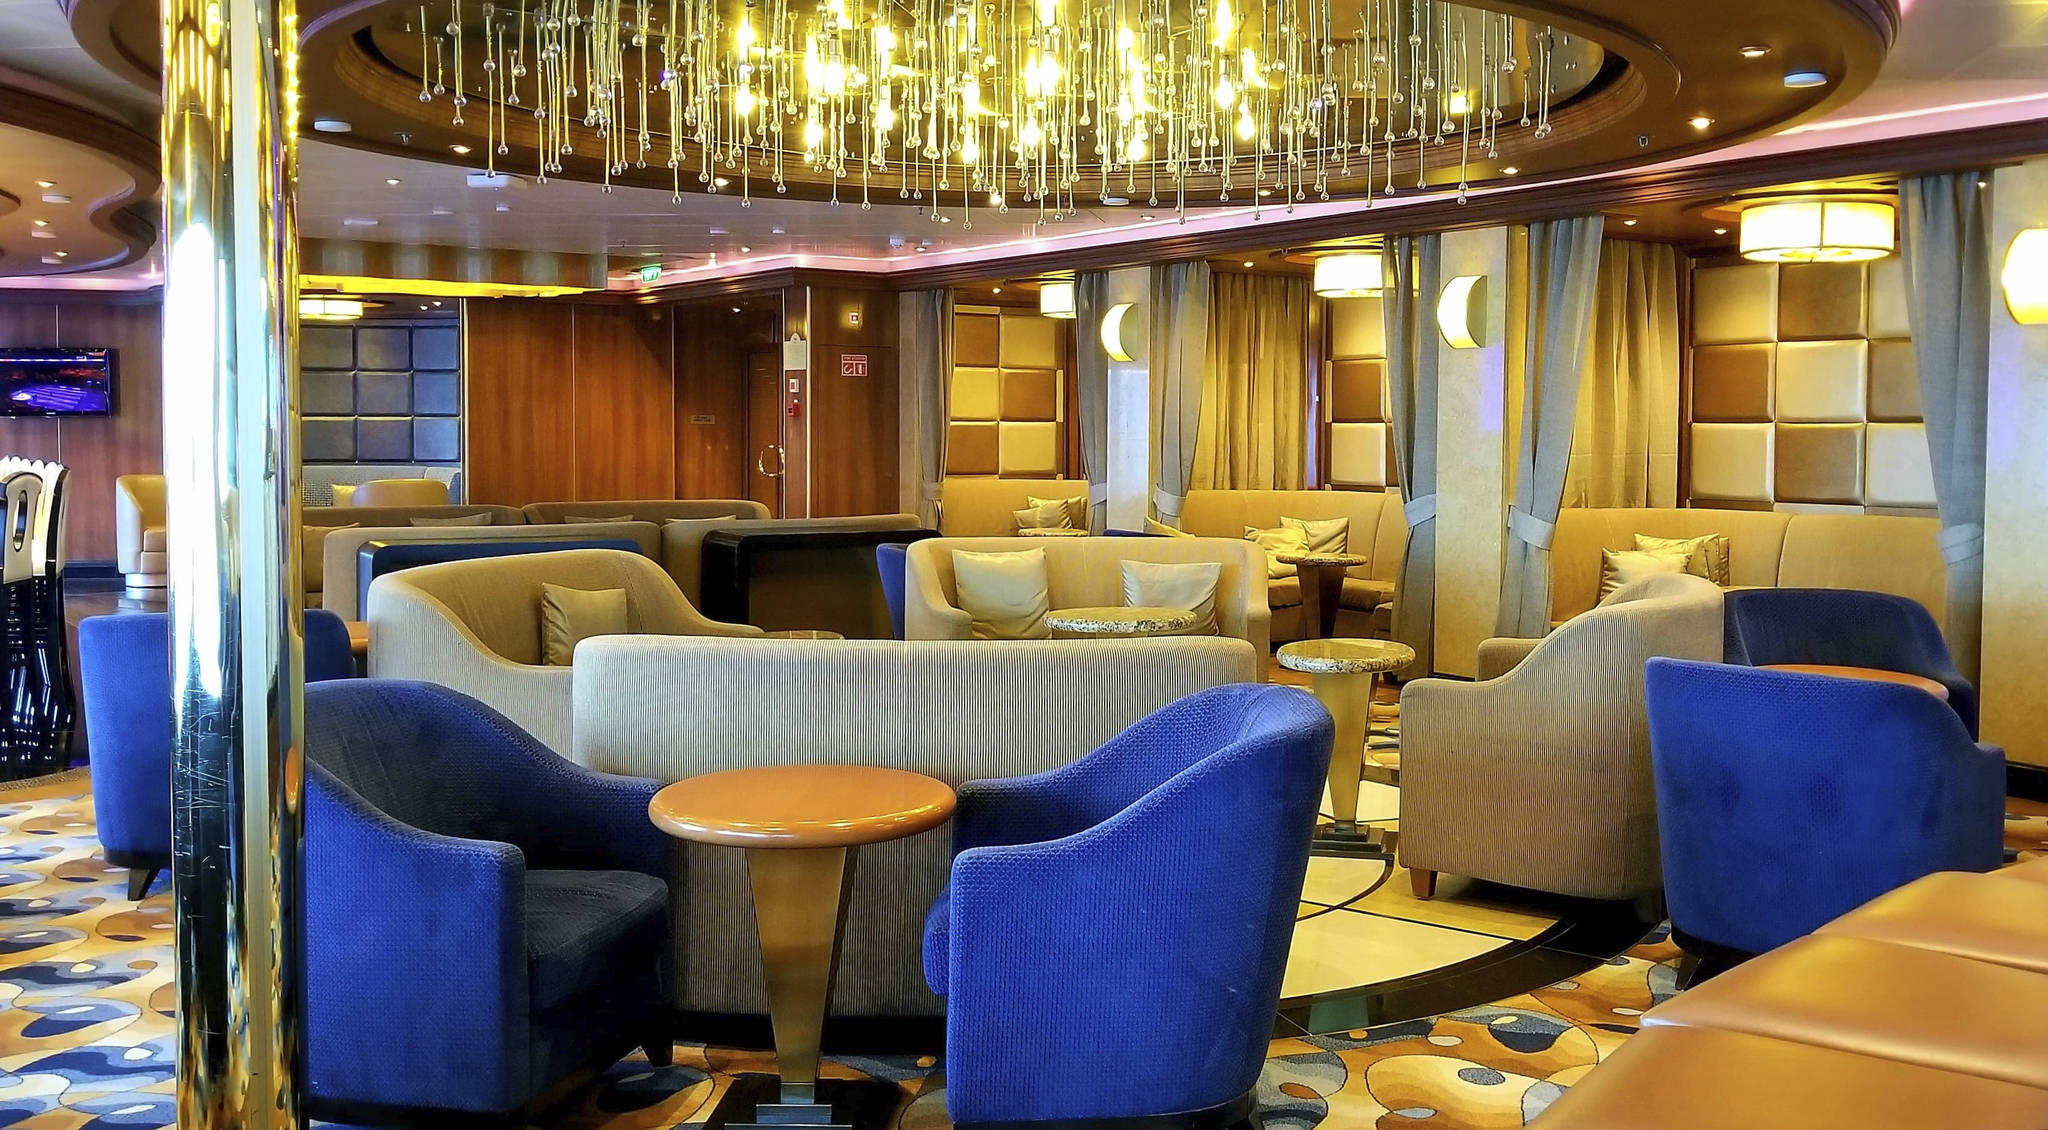 This photo provided by Michele Smith, shows an empty lounge area on the Grand Princess cruise ship Friday, March 6, 2020, off the California coast. Scrambling to keep the coronavirus at bay, officials ordered a cruise ship with about 3,500 people aboard to stay back from the California coast until passengers and crew can be tested, after a traveler from its previous voyage died of the disease and at least two others became infected. A Coast Guard helicopter lowered test kits onto the 951-foot (290-meter) Grand Princess by rope as the vessel lay at anchor off Northern California, and authorities said the results would be available on Friday, March 6, 2020. Princess Cruise Lines said fewer than 100 people aboard had been identified for testing. (Michele Smith via AP)